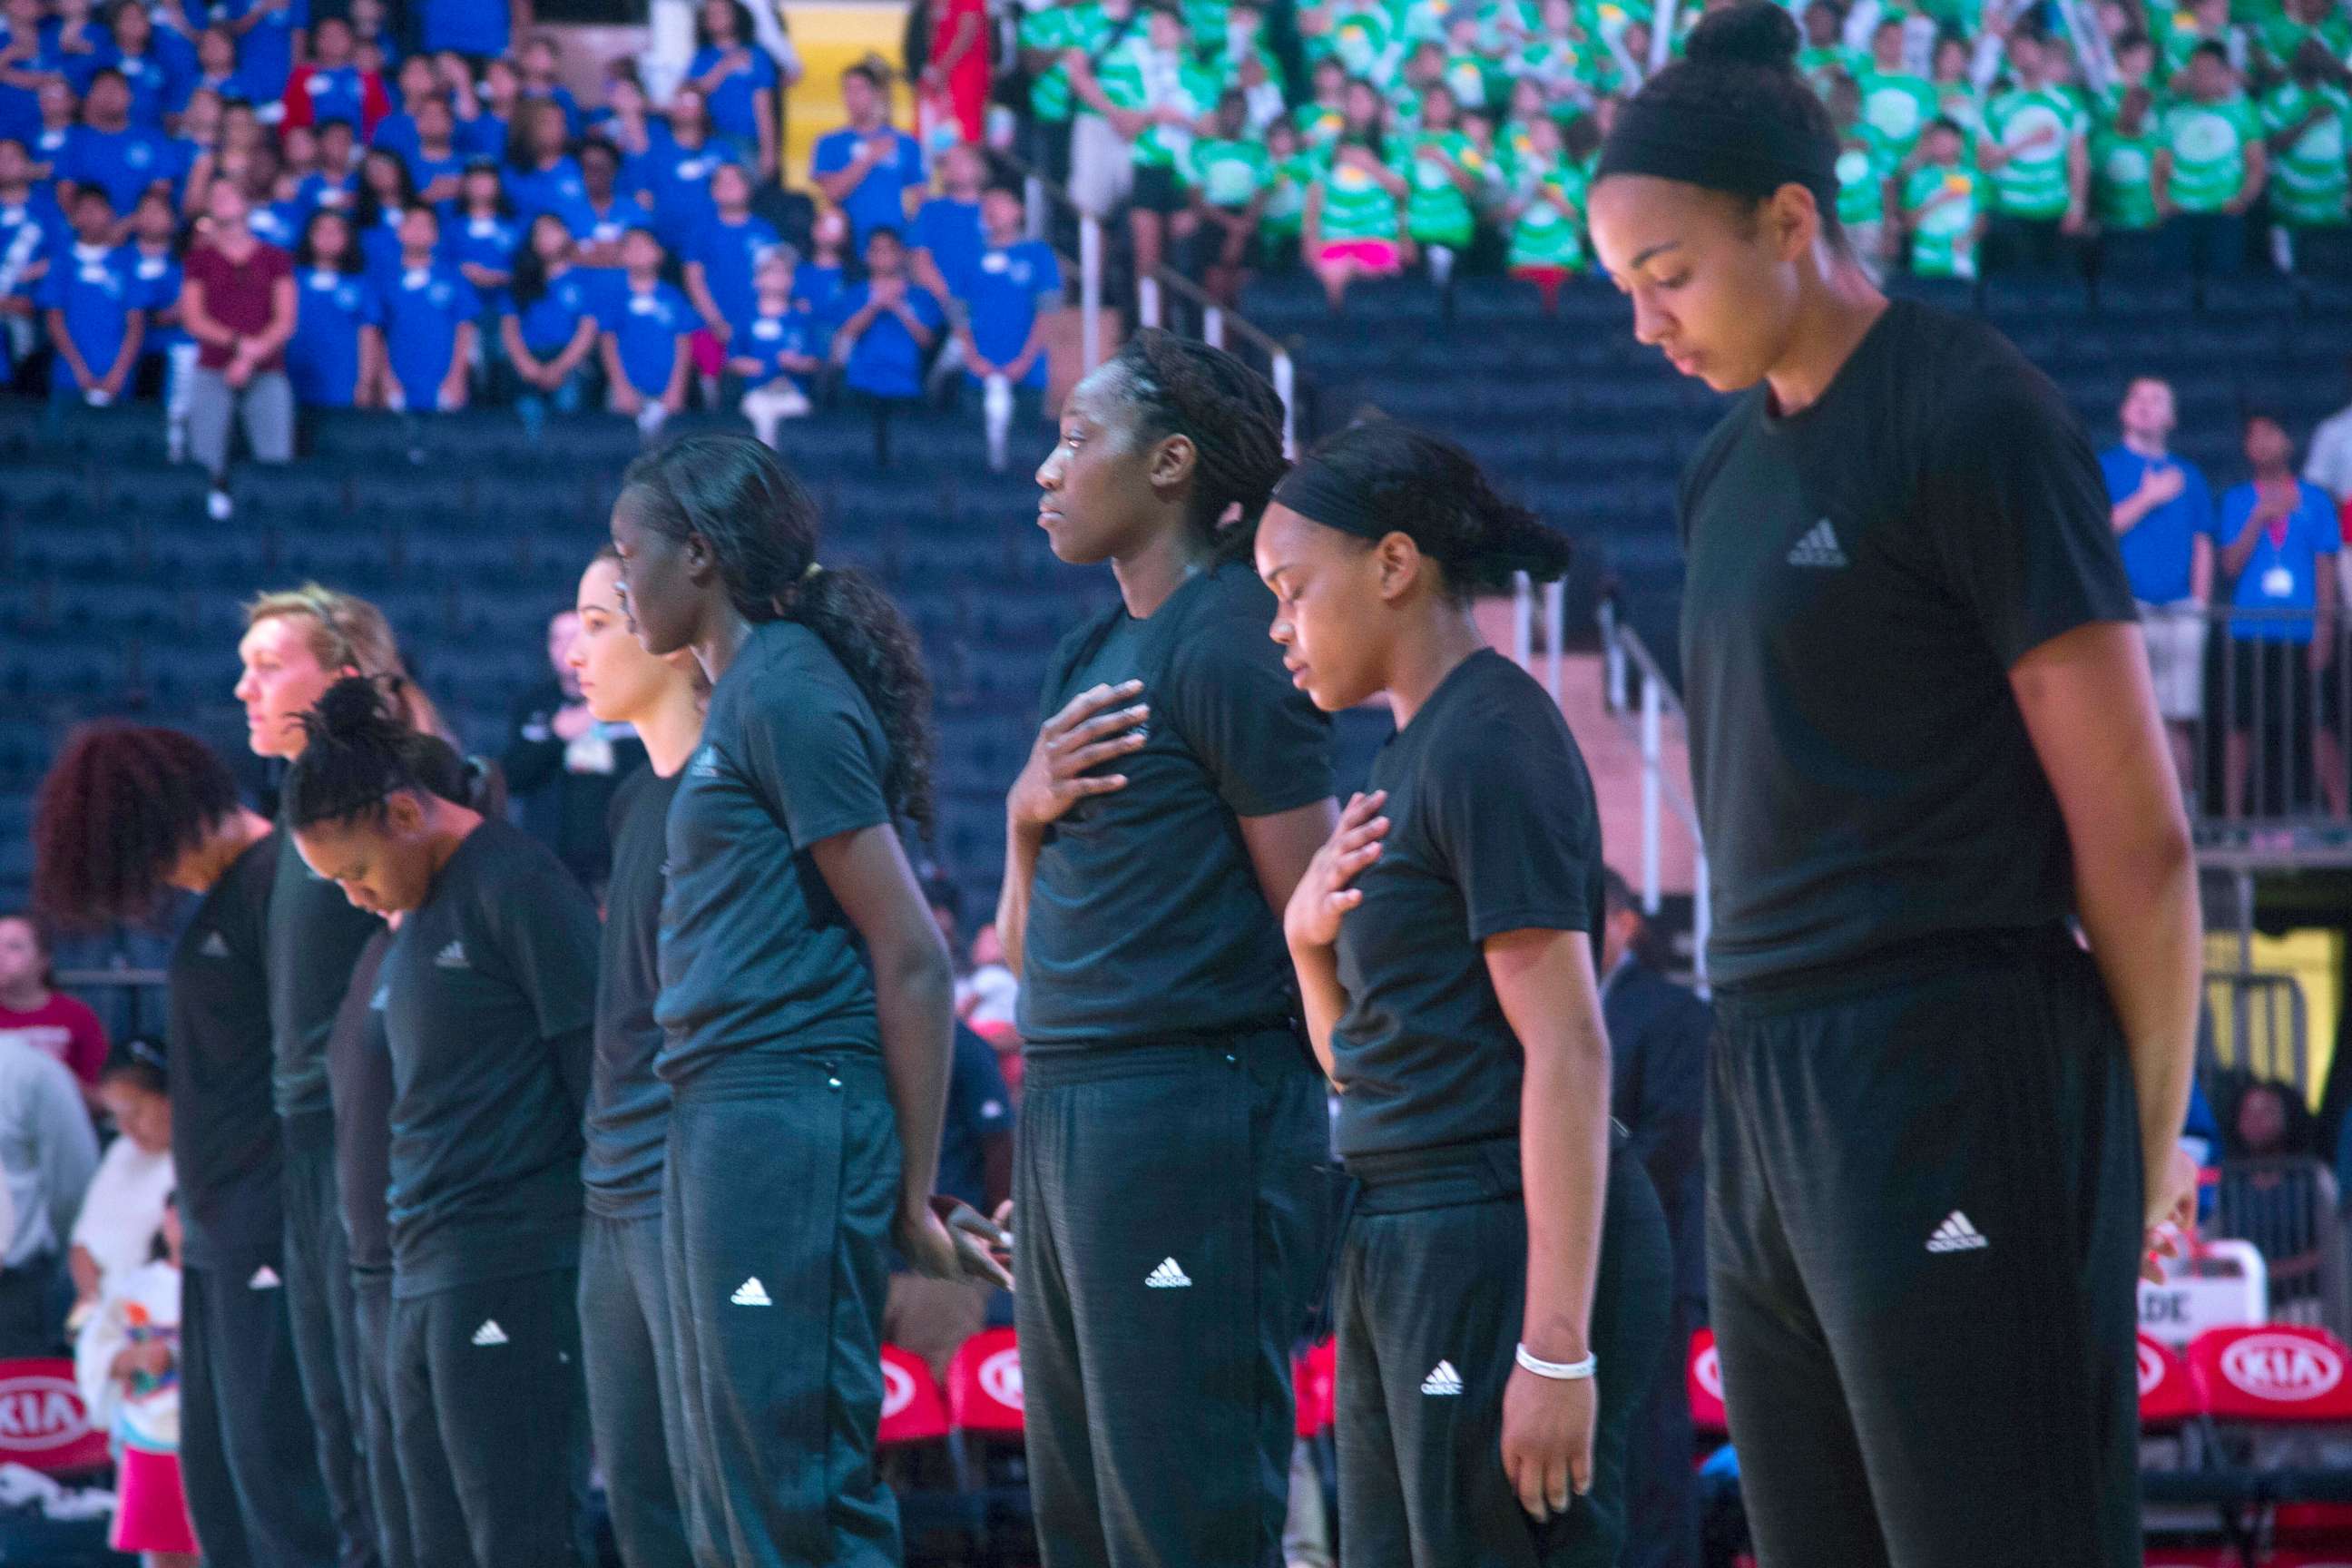 PHOTO: Members of the New York Liberty basketball team stand during the playing of the Star Spangled Banner prior to a game against the Atlanta Dream, July 13, 2016, in New York.